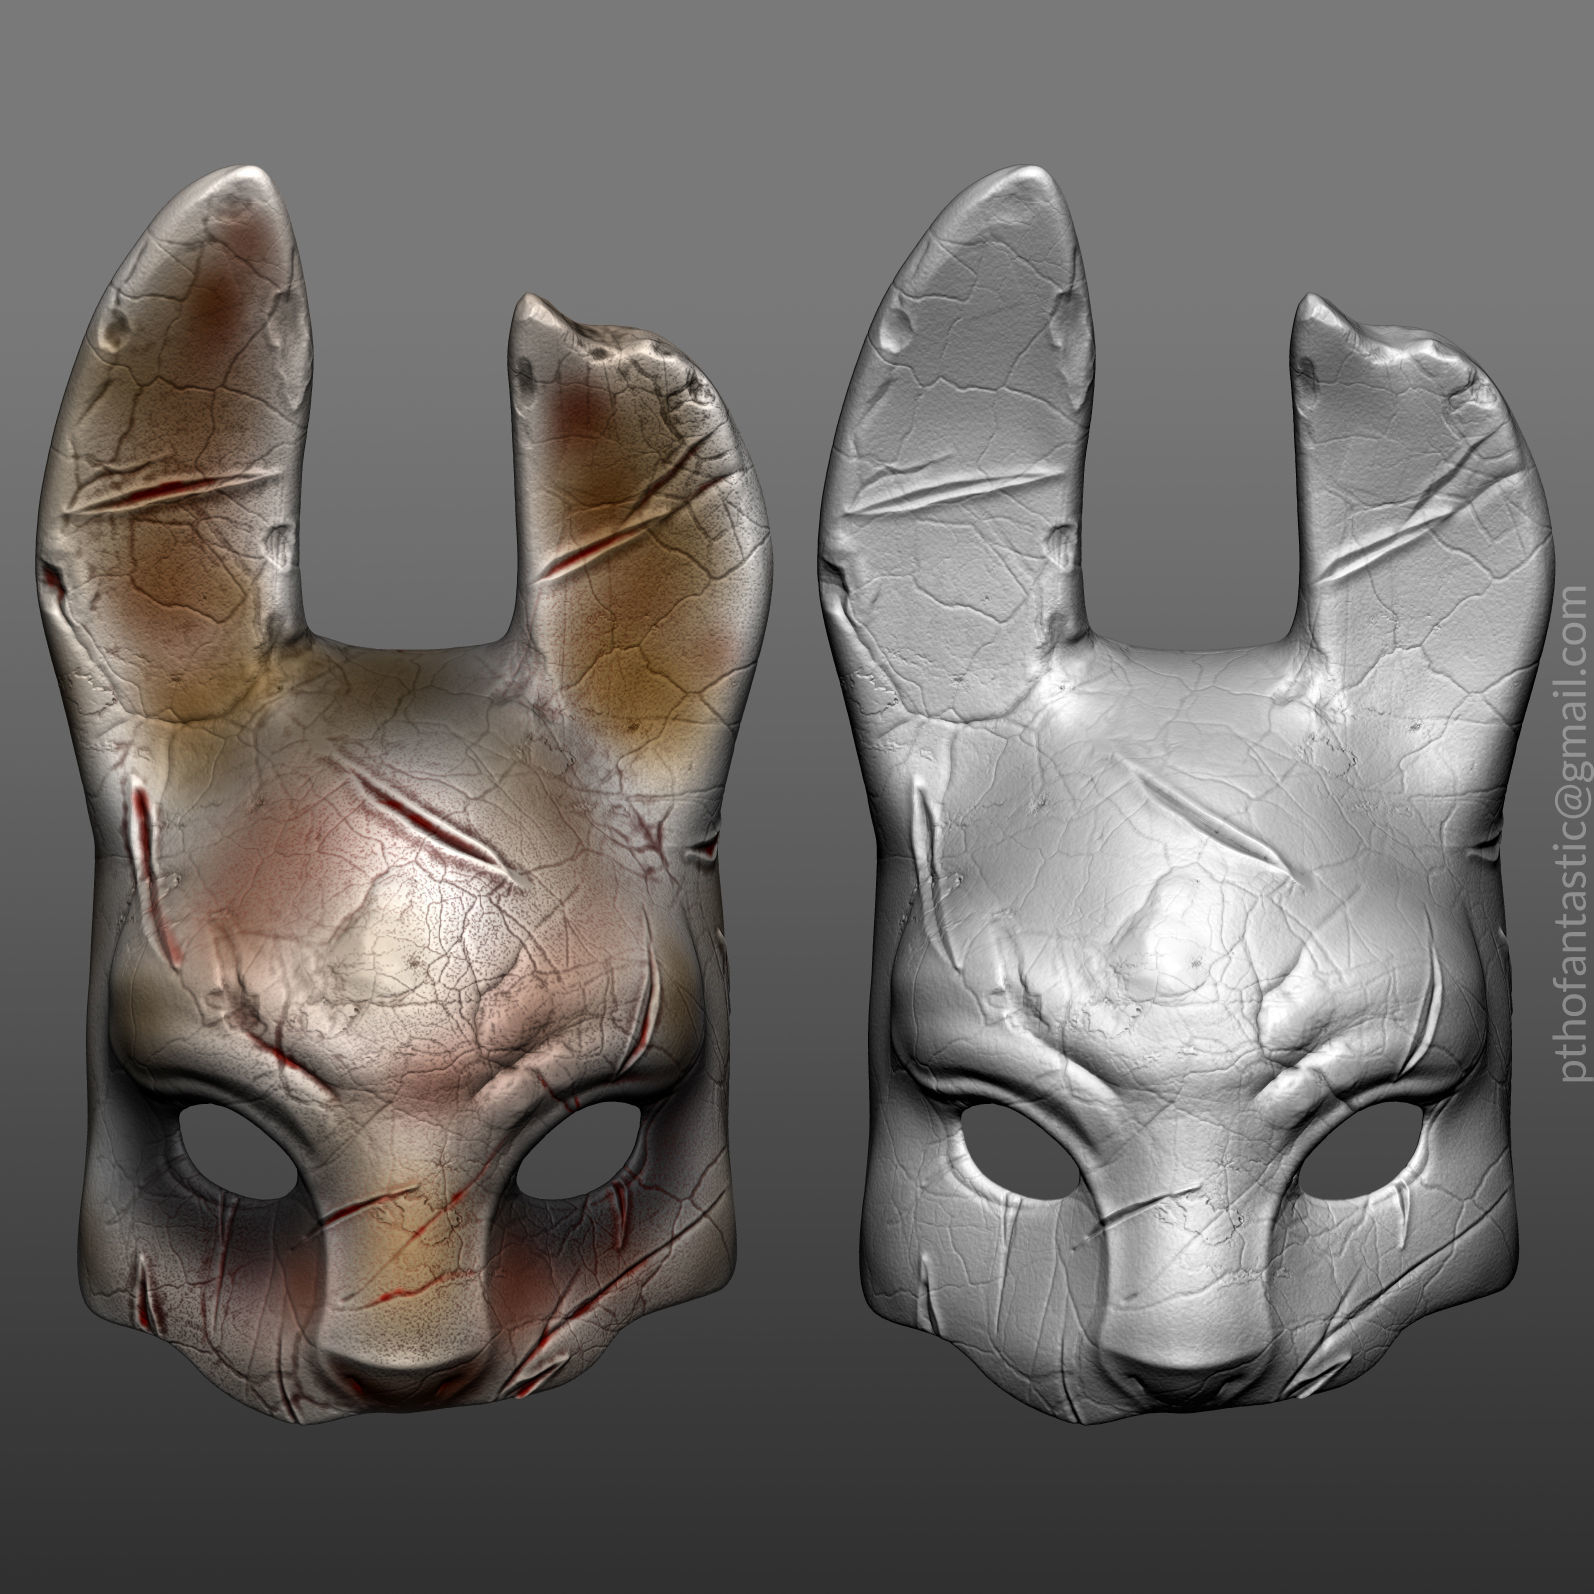 Dead By Daylight The Huntress Mask 3D Printable Model 3 tout Modele Masque Halloween 